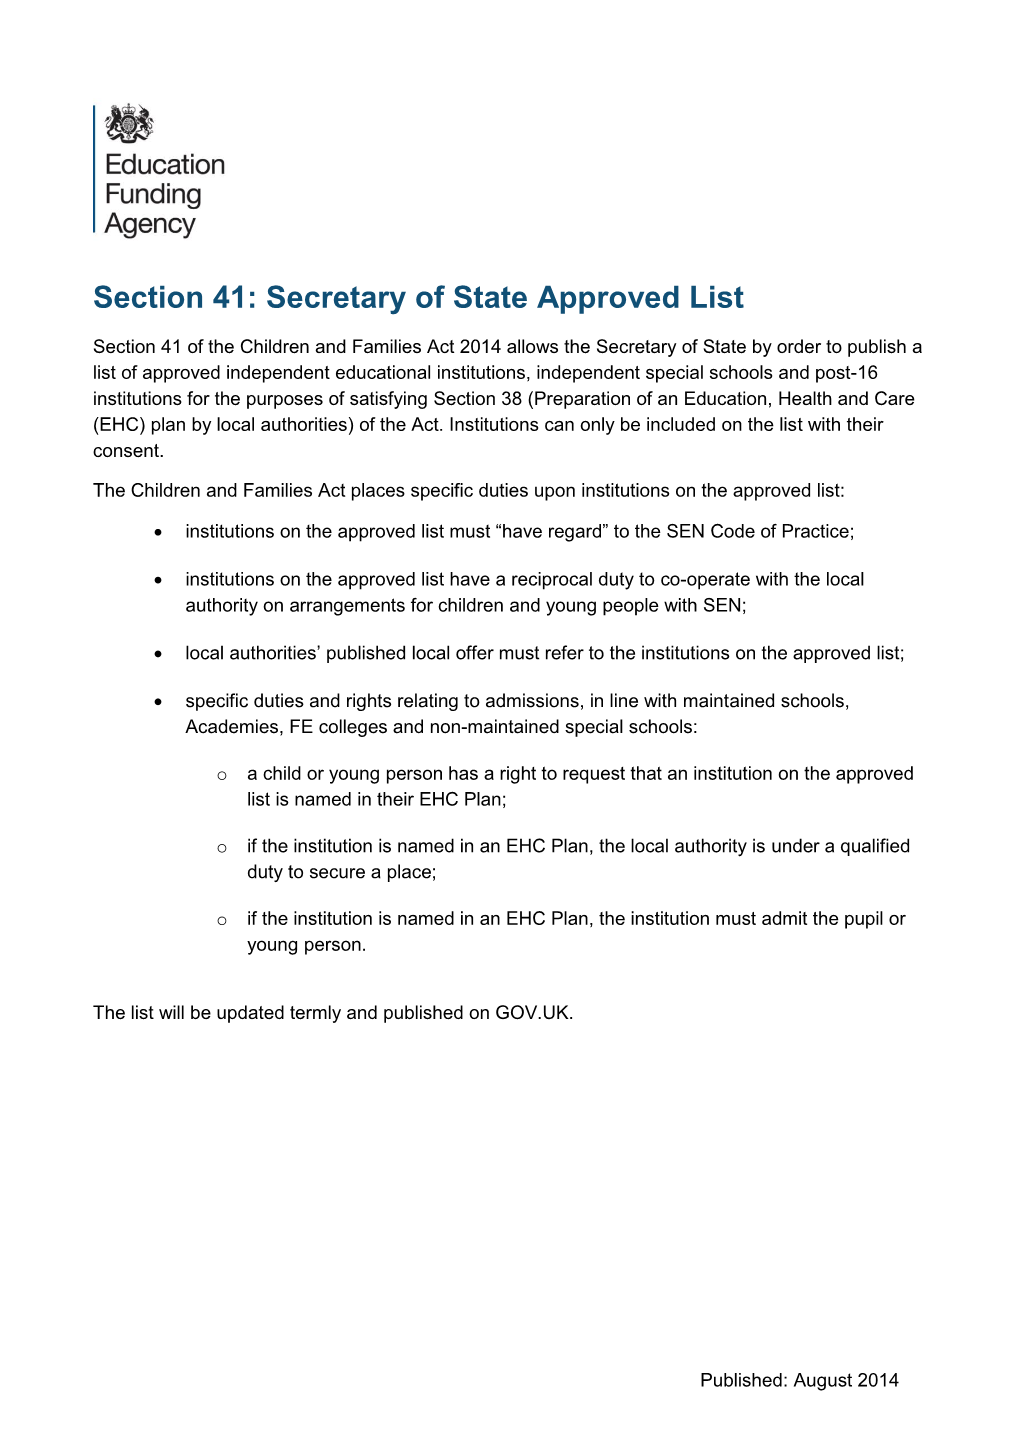 Section 41 Approved List